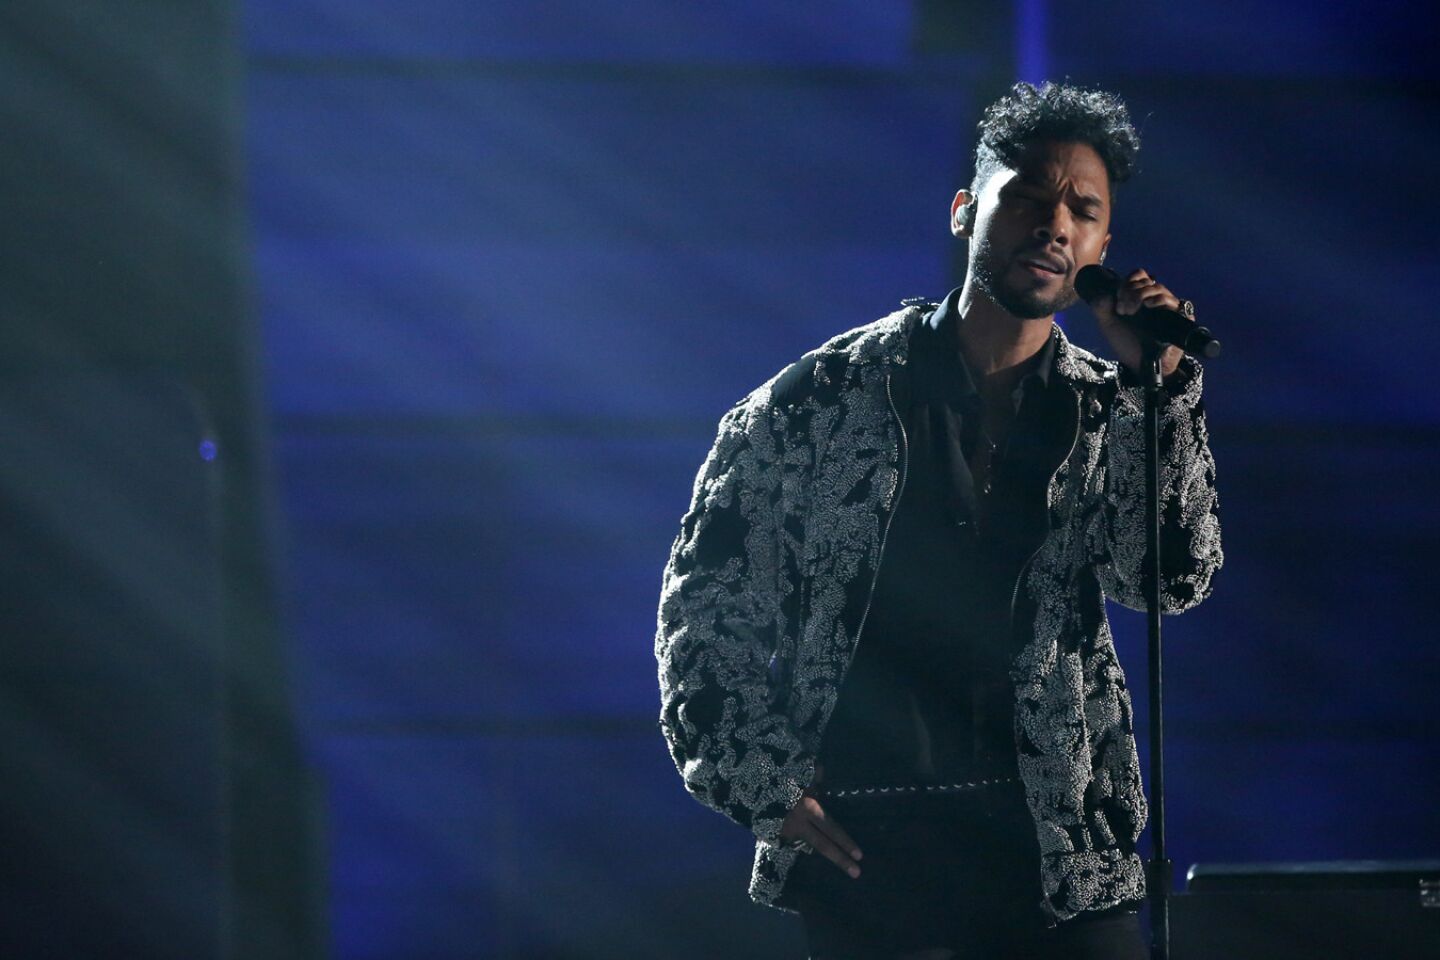 Miguel performs the song "Off the Wall" onstage.